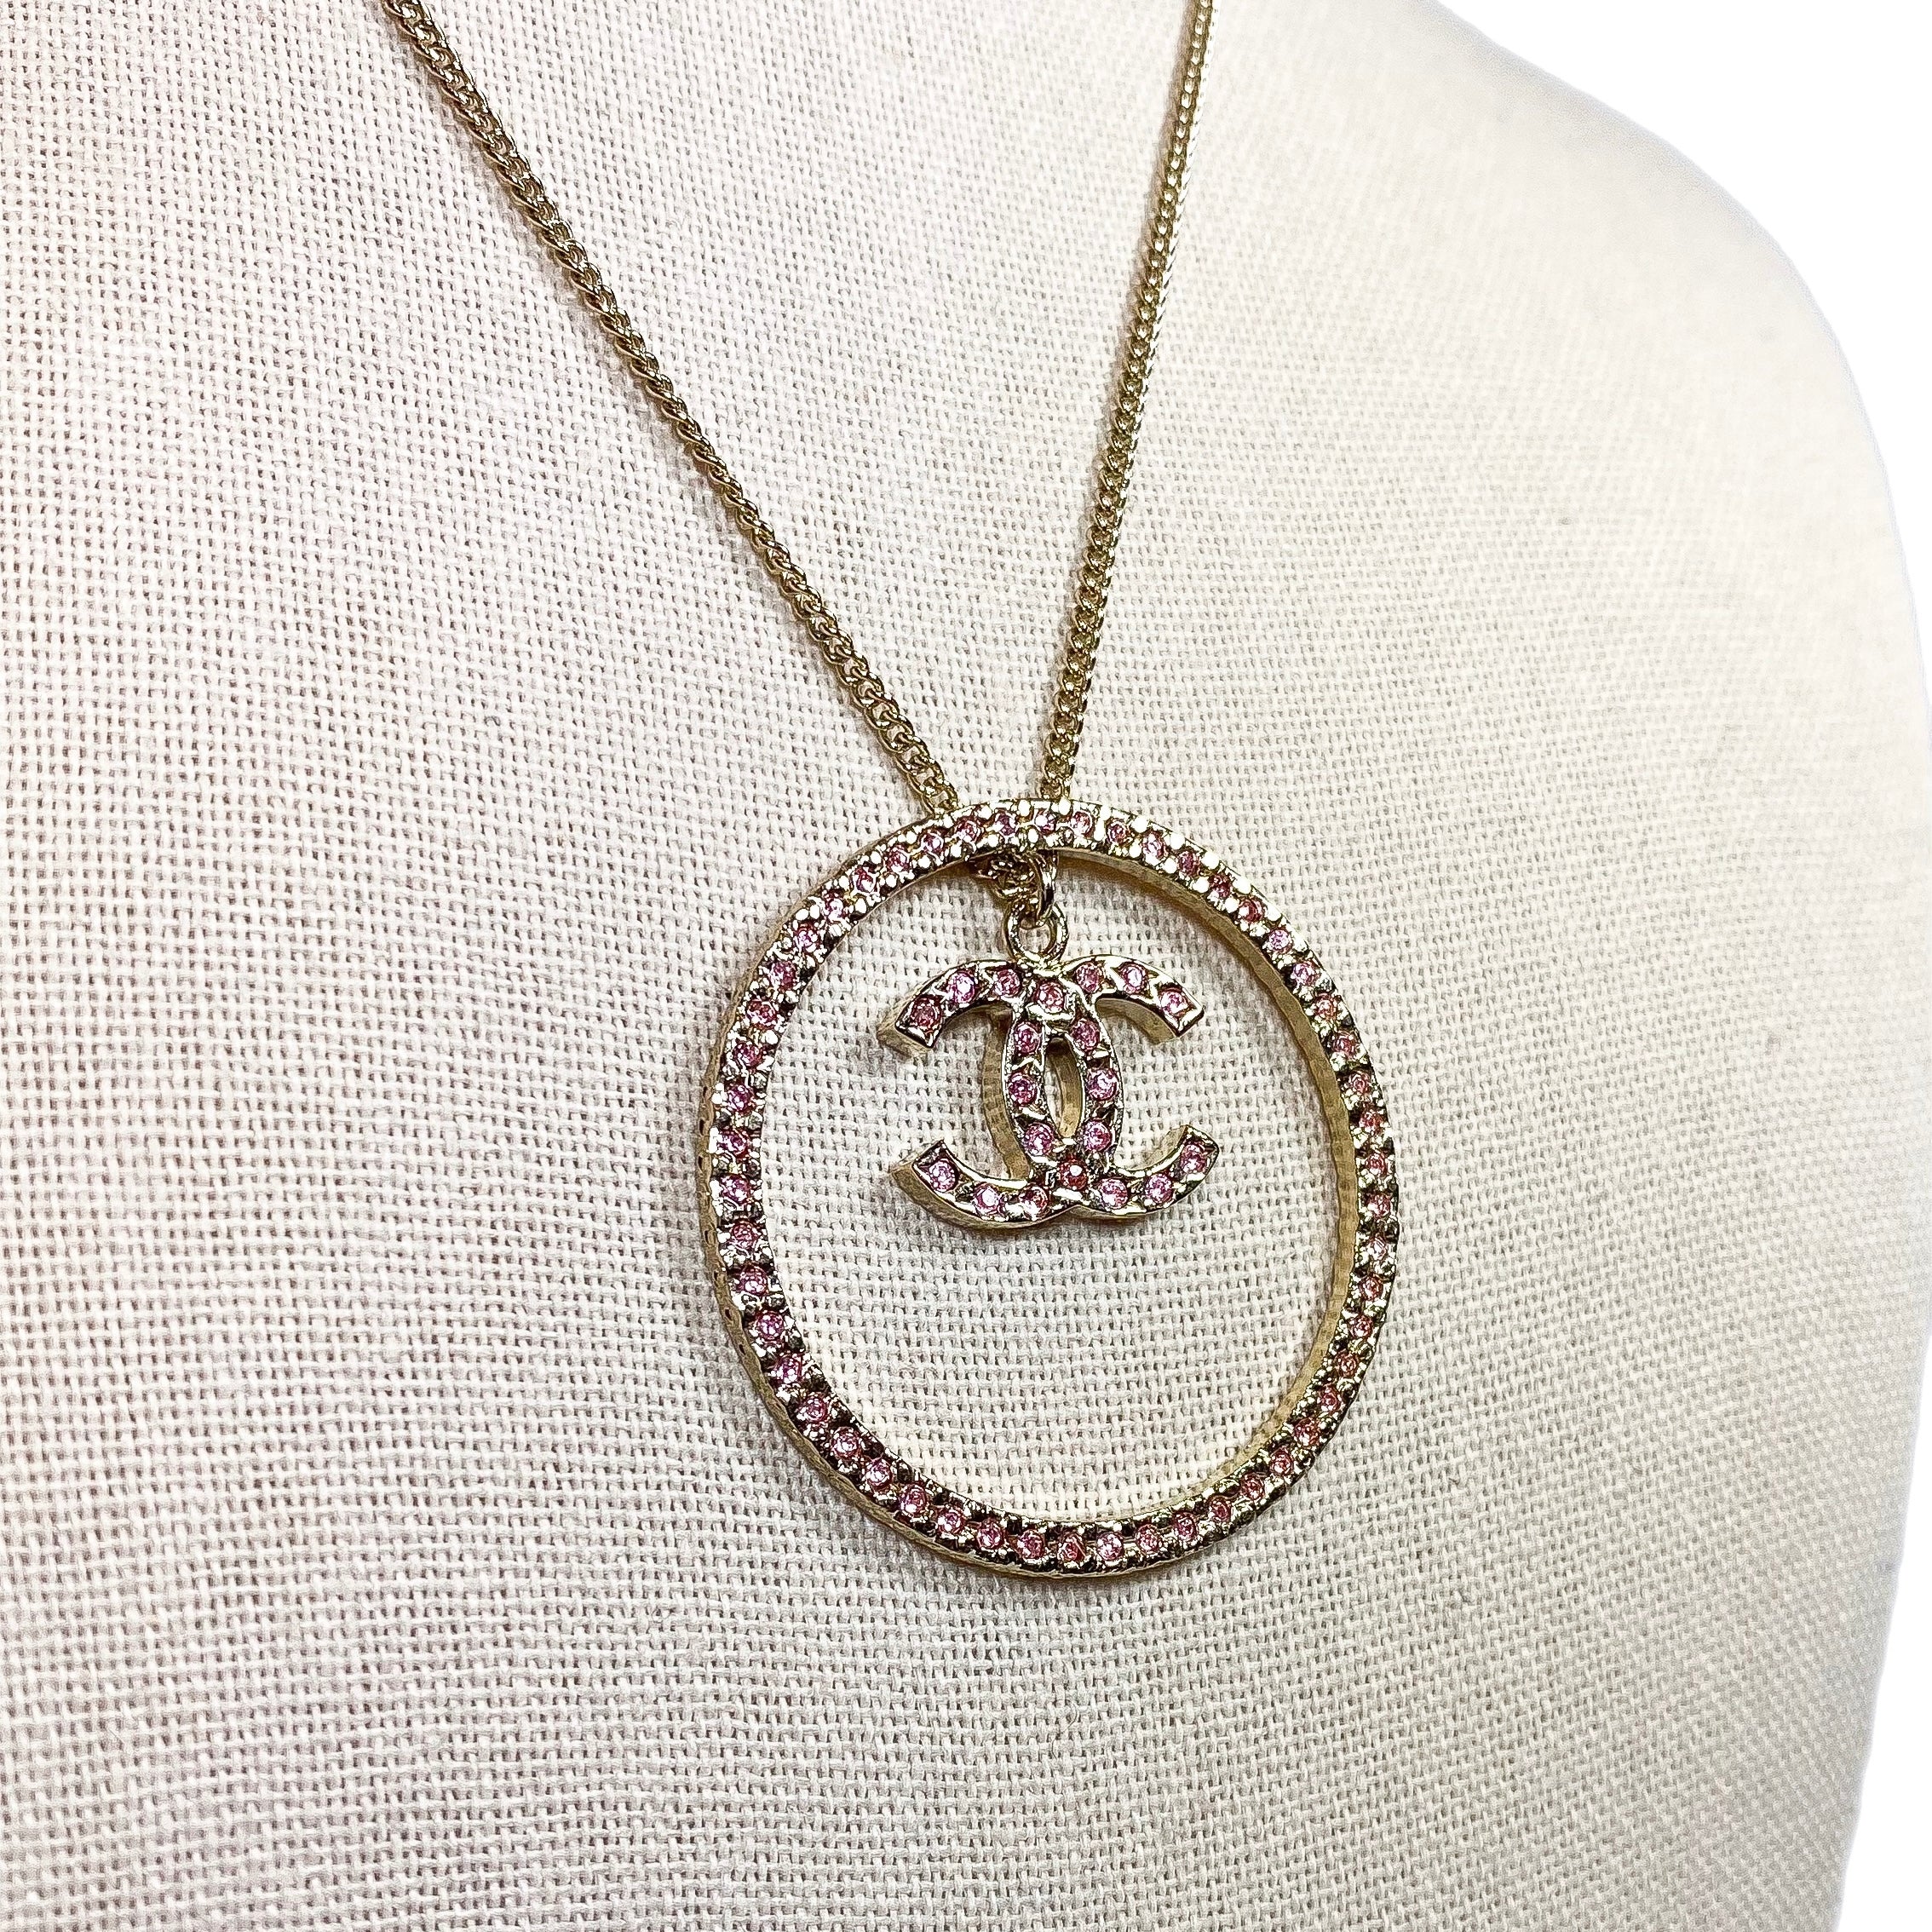 Chanel Circle CC Logo Necklace with Pink Crystals